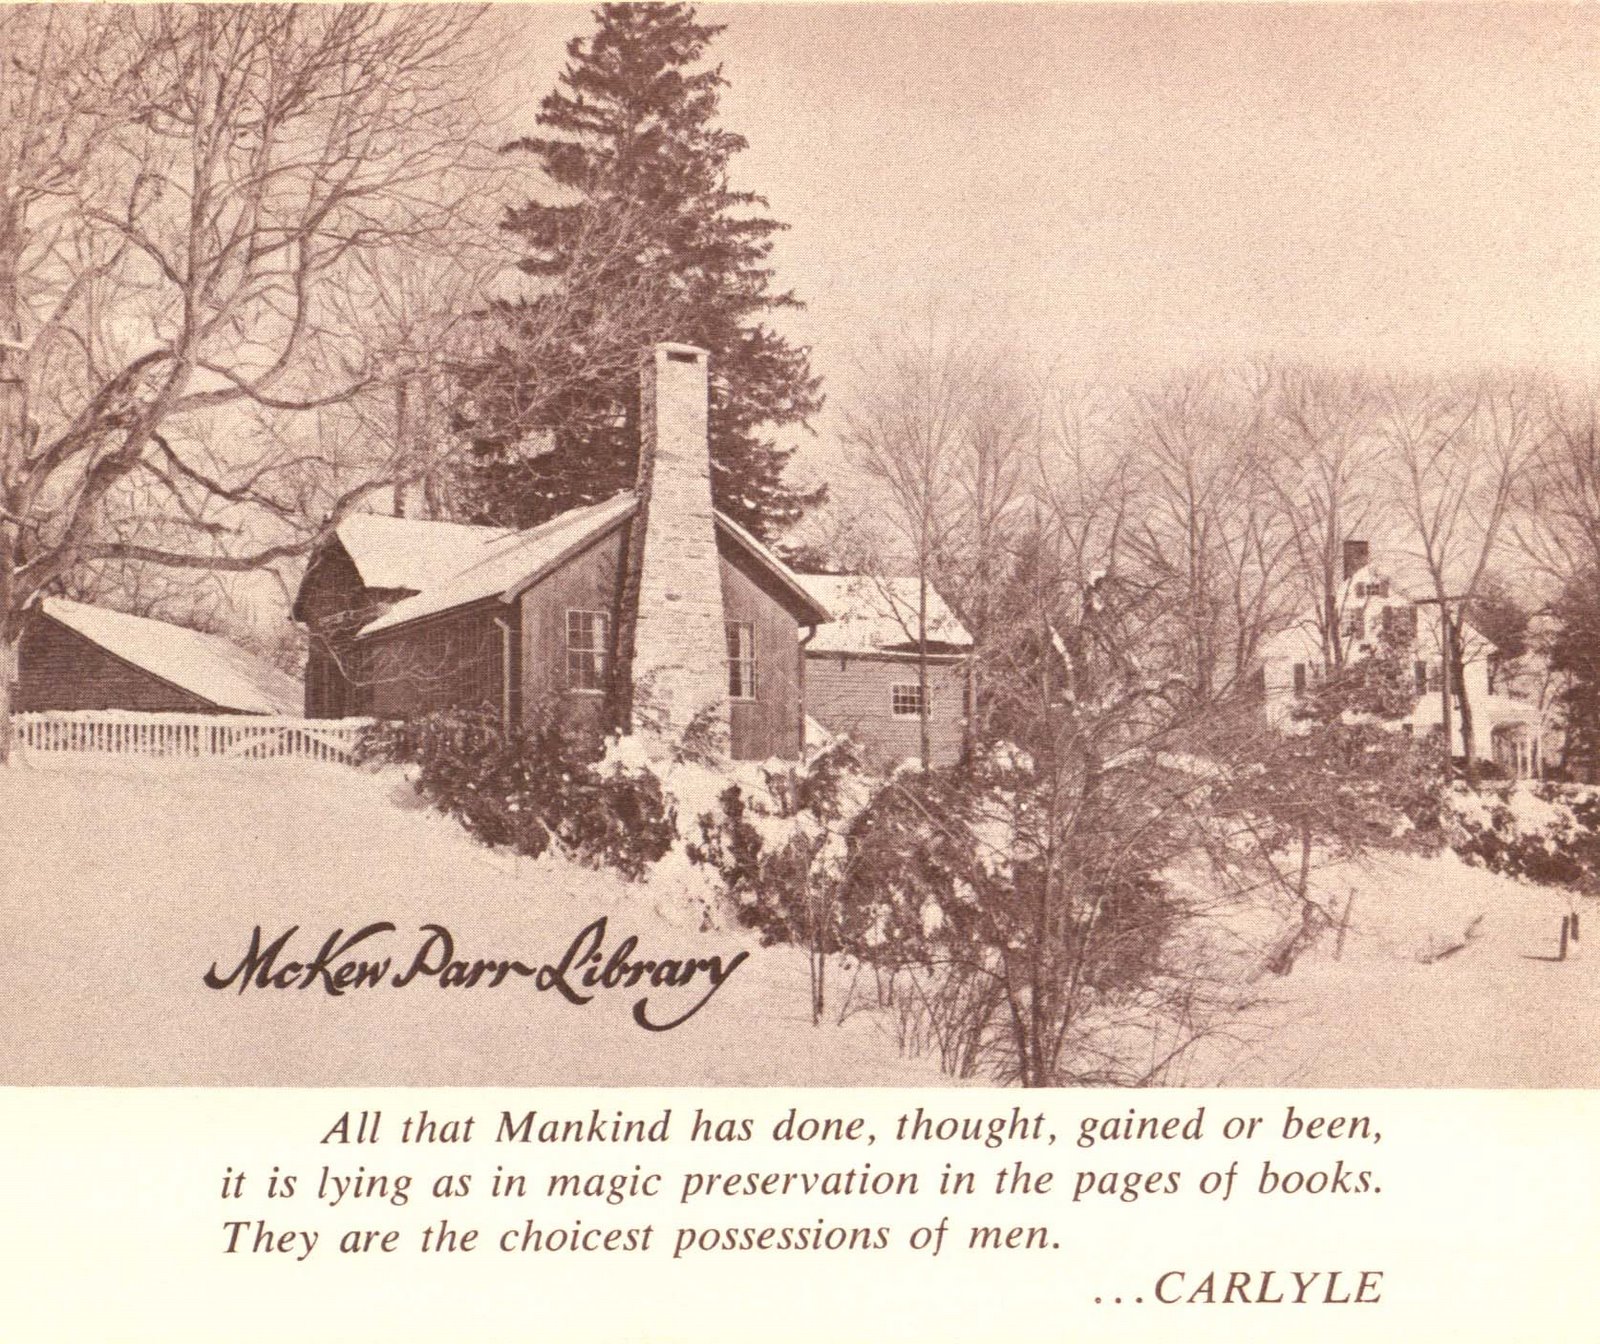 Photograph of McKew Parr Library exterior with an accompanying quote from Carlyle